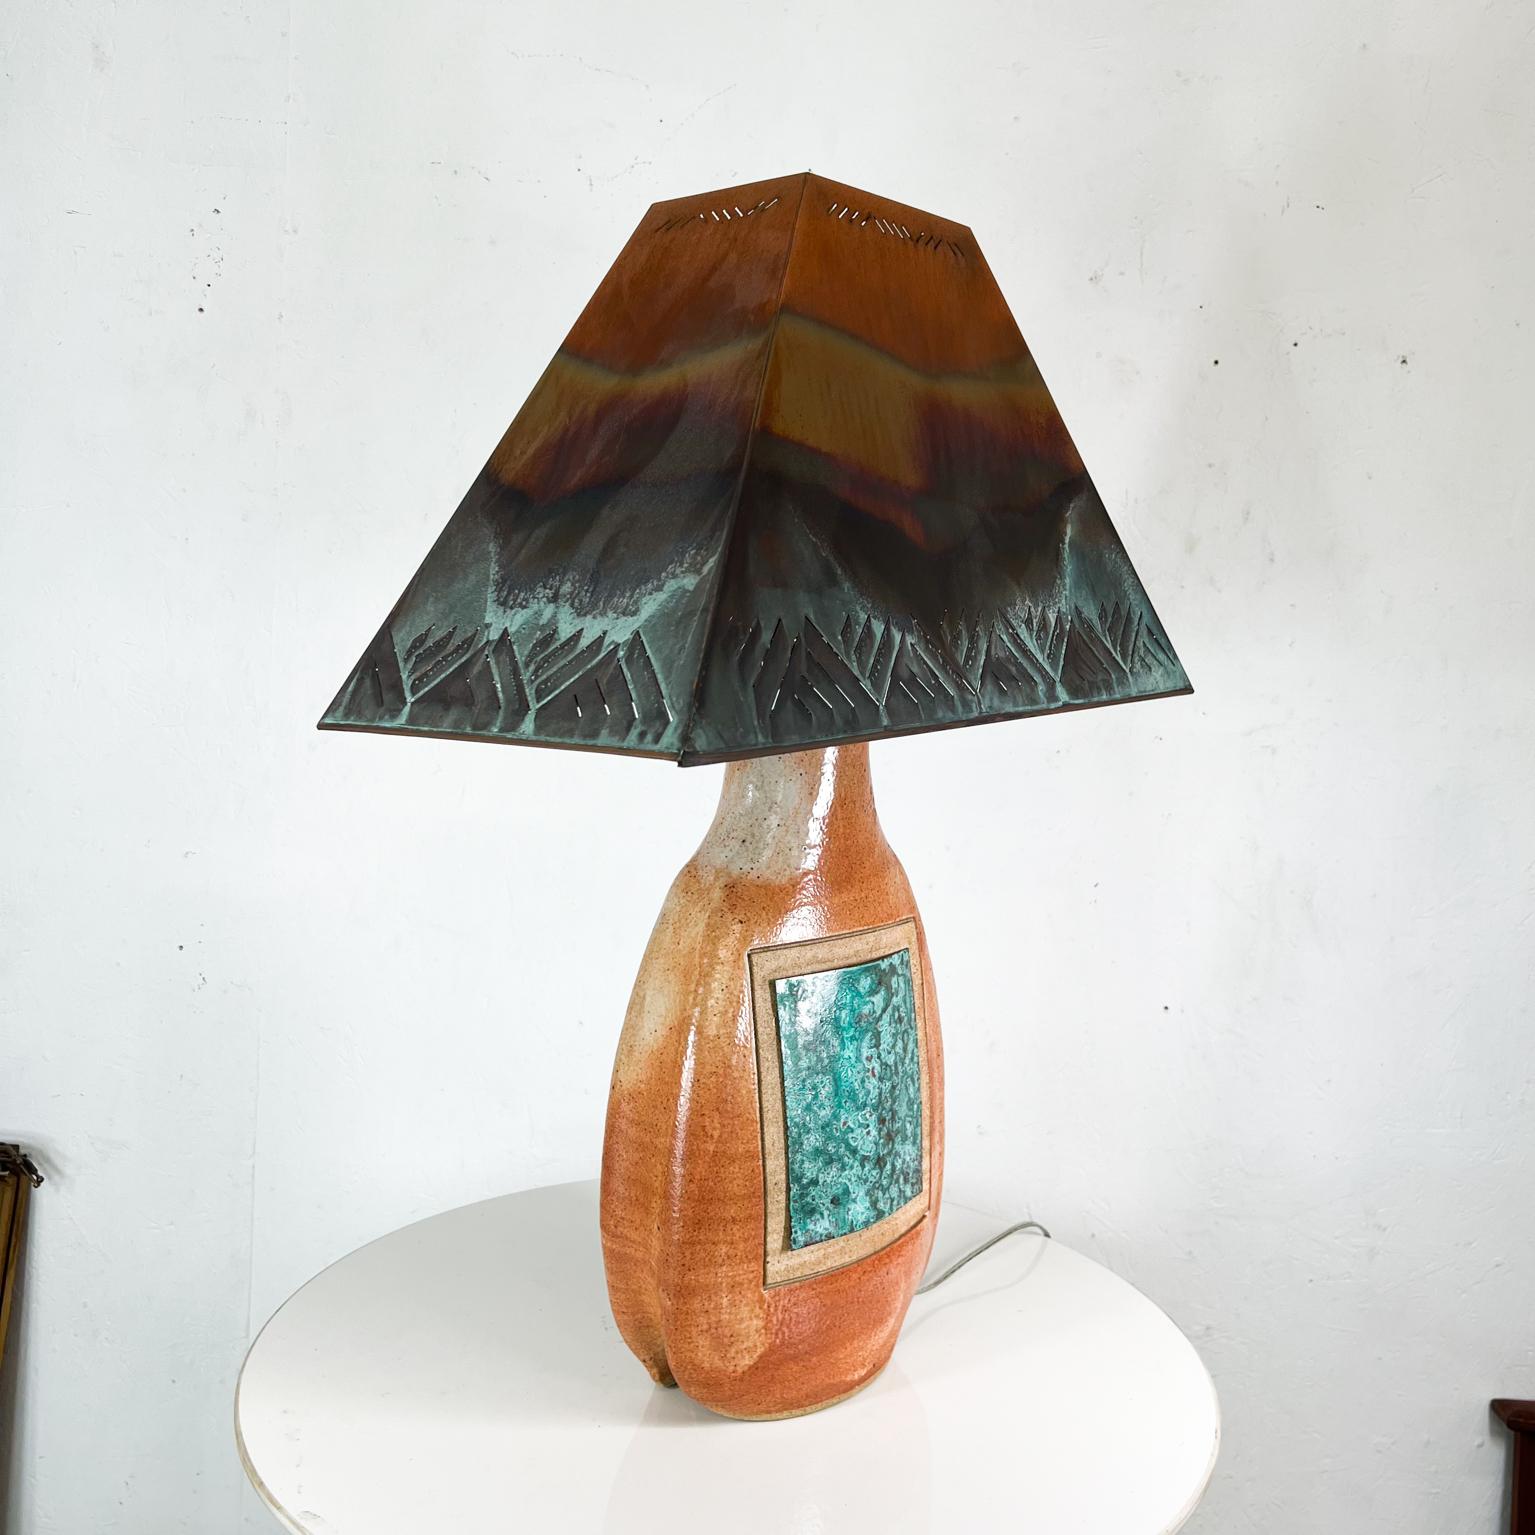 2014 New Mexico Art Pottery W. Kohler Co Table Lamp & Shade Patinated Copper 9